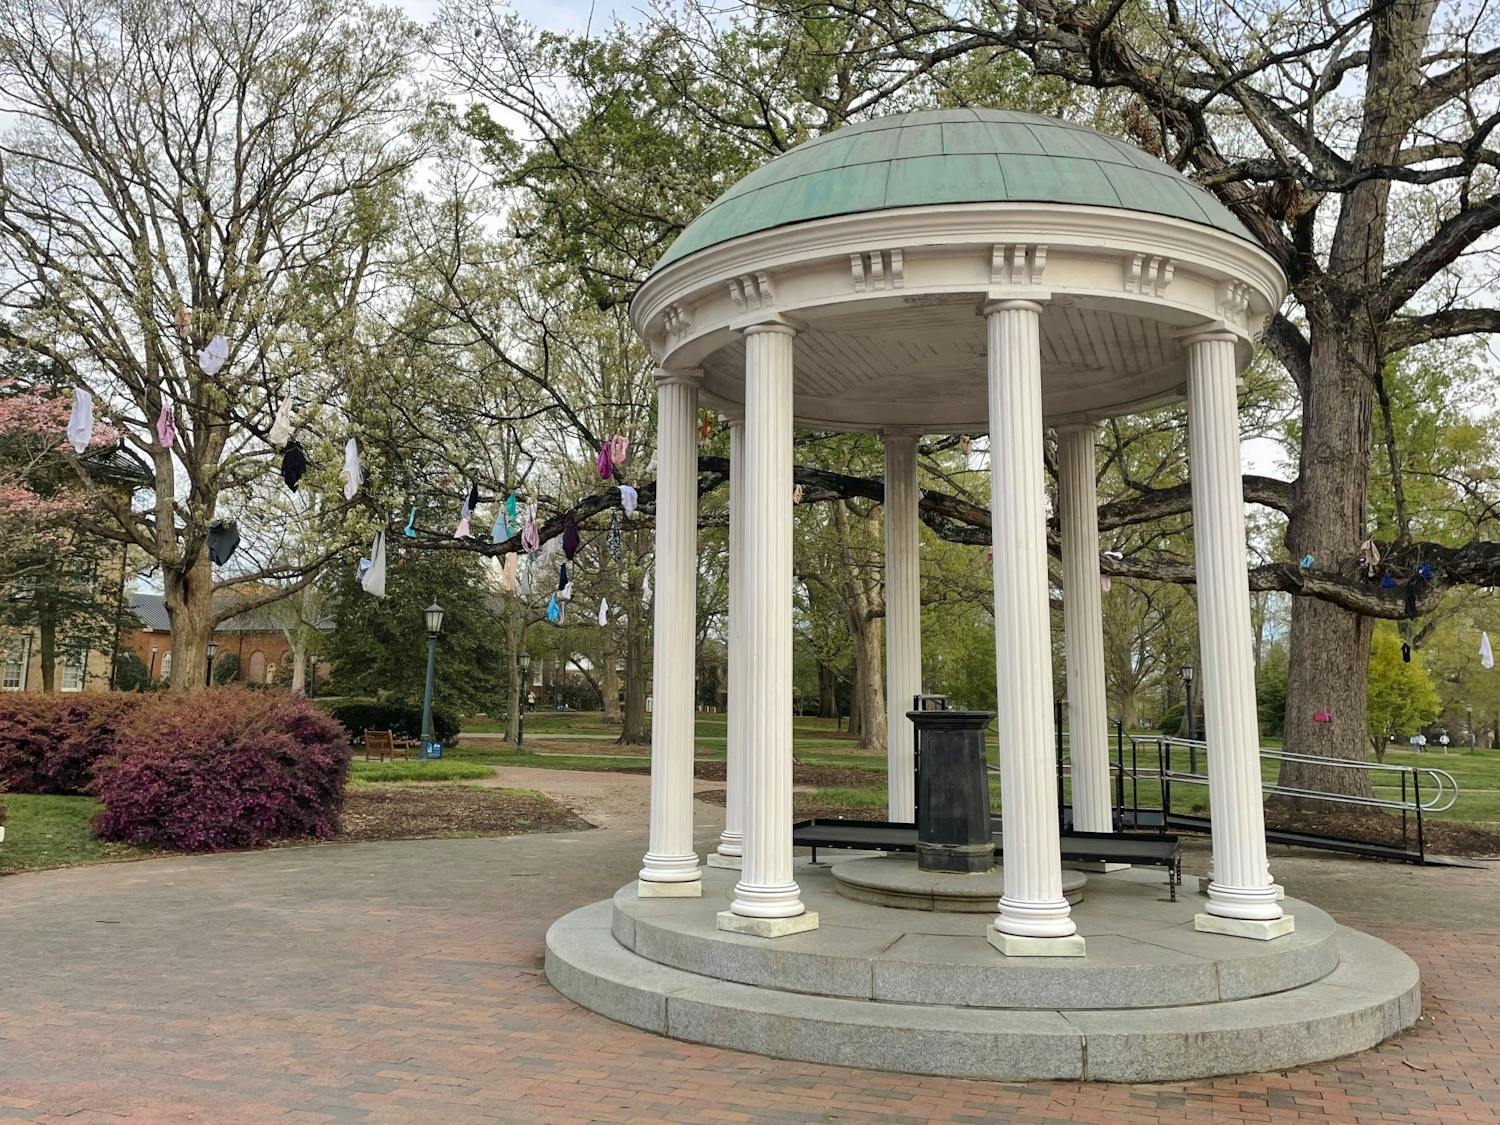 Underwear hang by the Old Well on Tuesday morning, March 28, 2023.